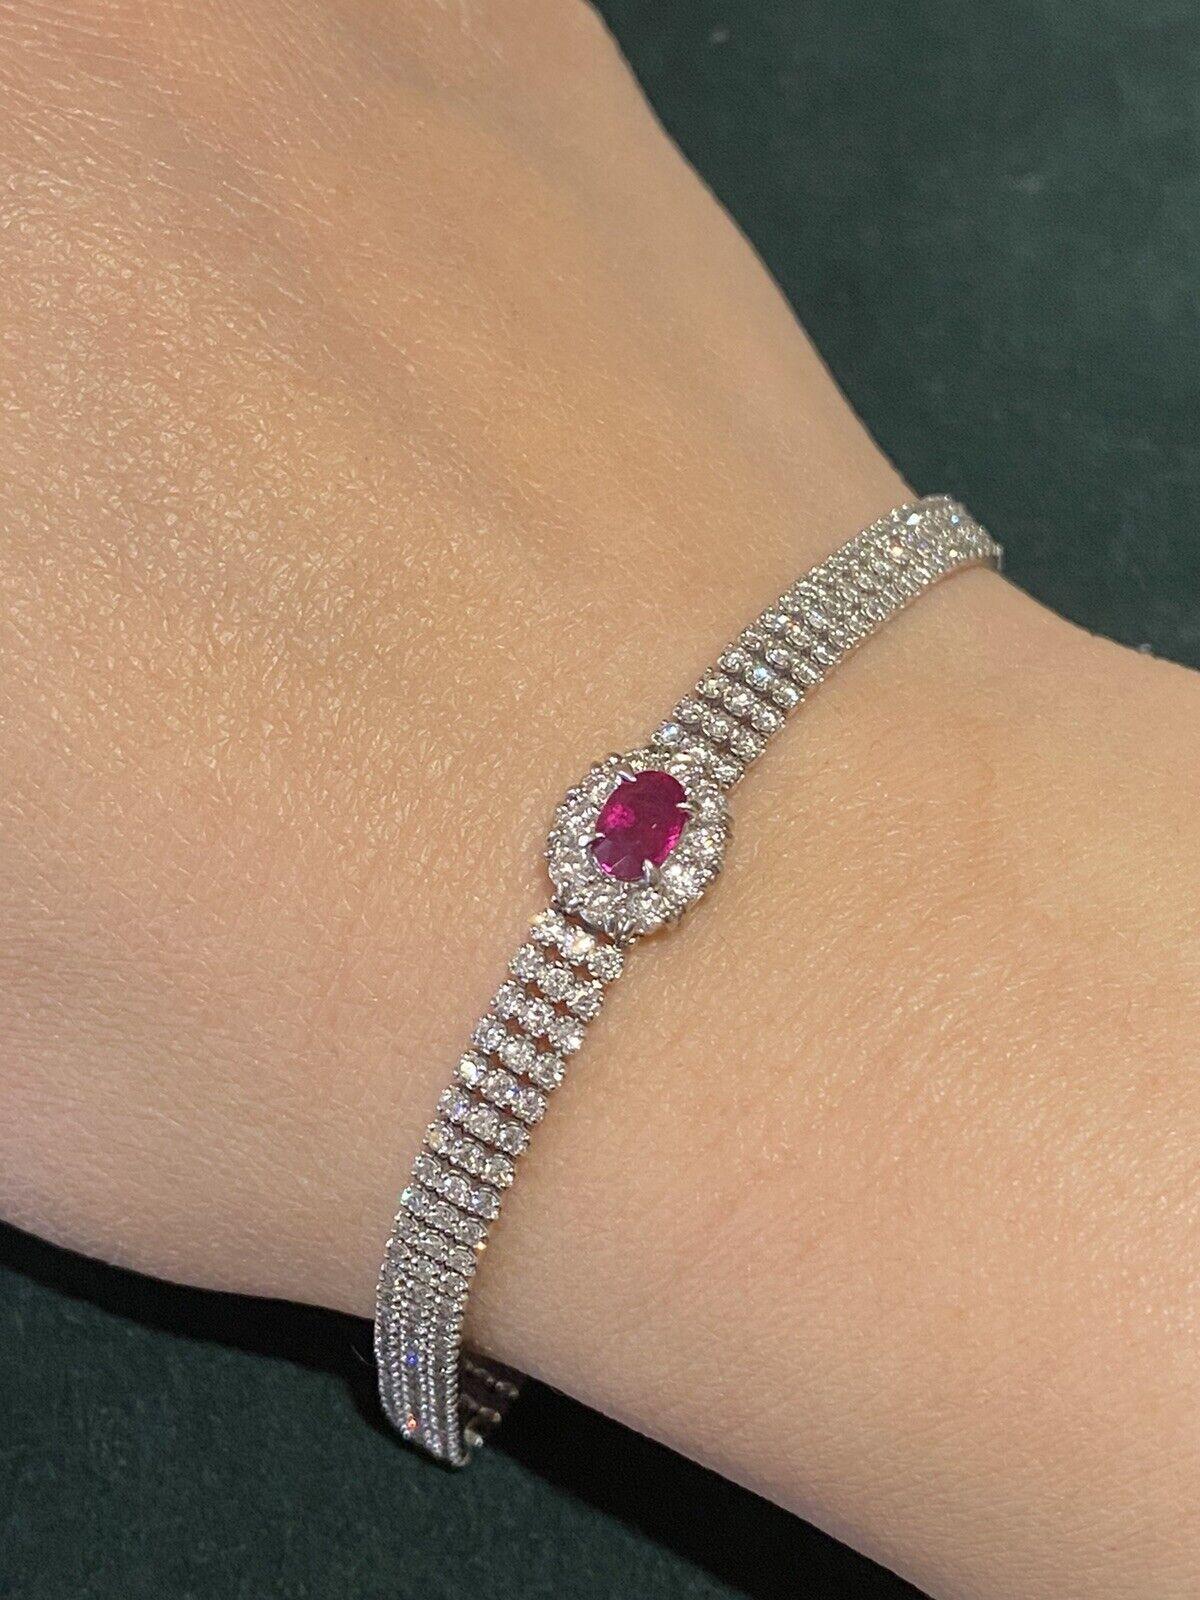 Estate Oval Ruby & Diamond Bracelet in Platinum

Estate Oval Ruby and Diamond Bracelet features a 0.72 carat Oval Ruby in the center, accented by 238 Round Brilliant-cut Diamond forming a three row bracelet, all set in Platinum.

Total ruby weight